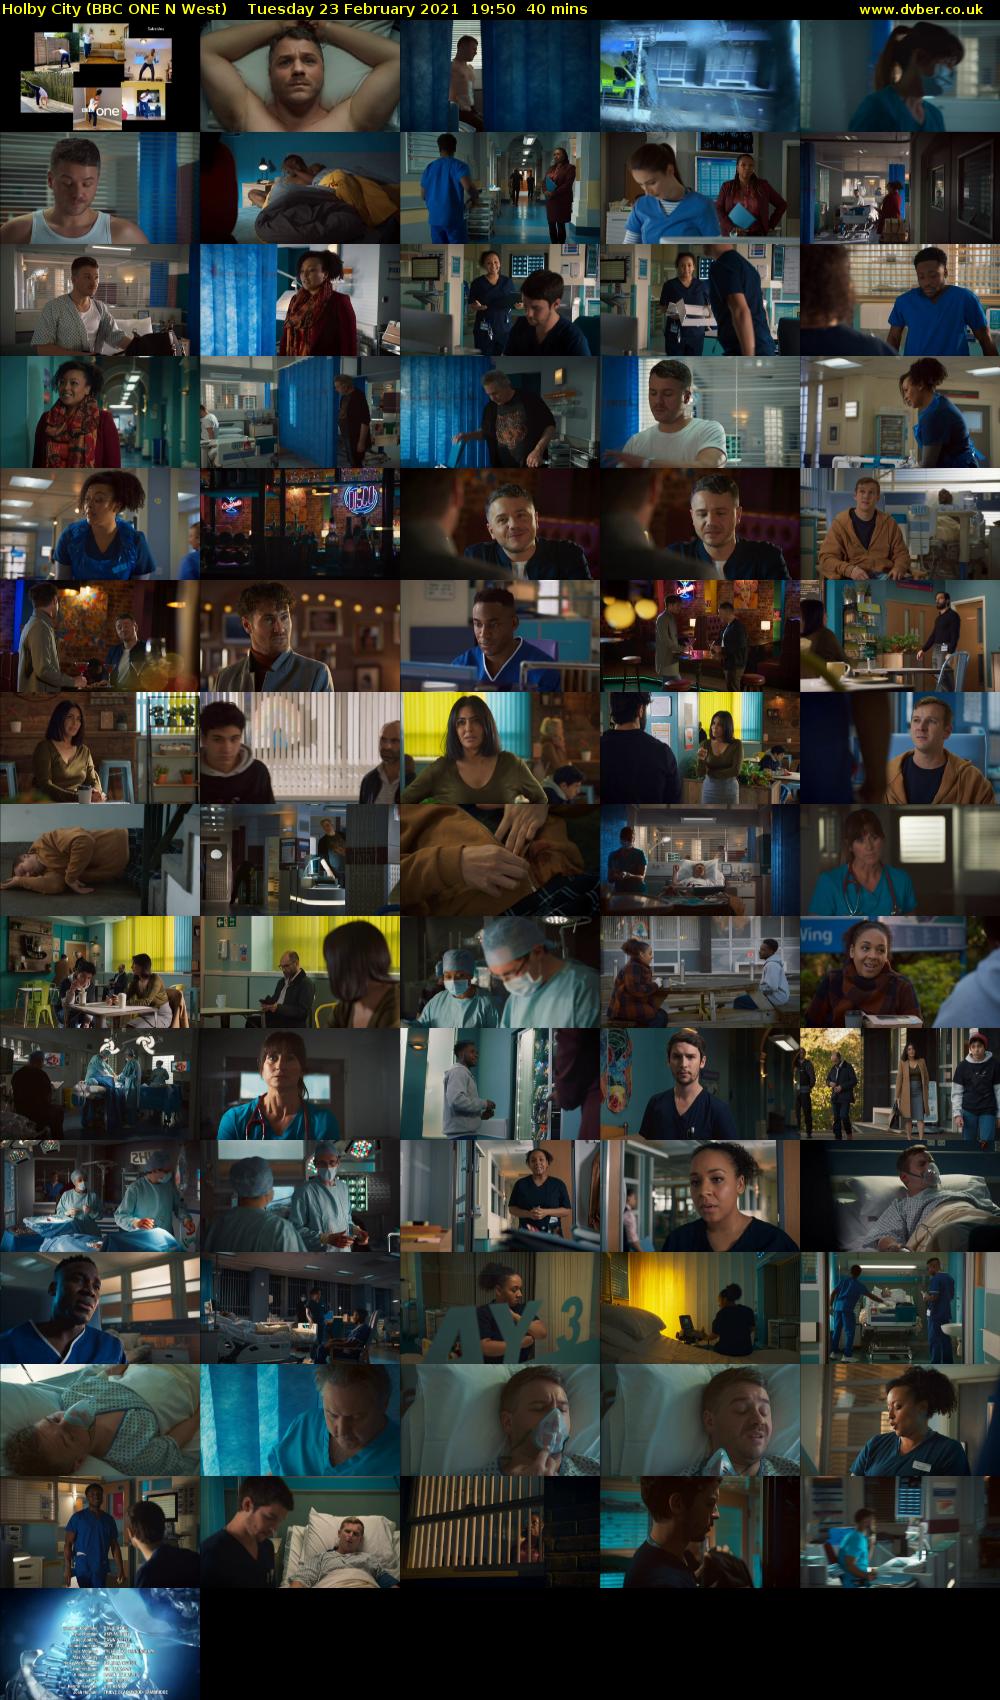 Holby City (BBC ONE N West) Tuesday 23 February 2021 19:50 - 20:30